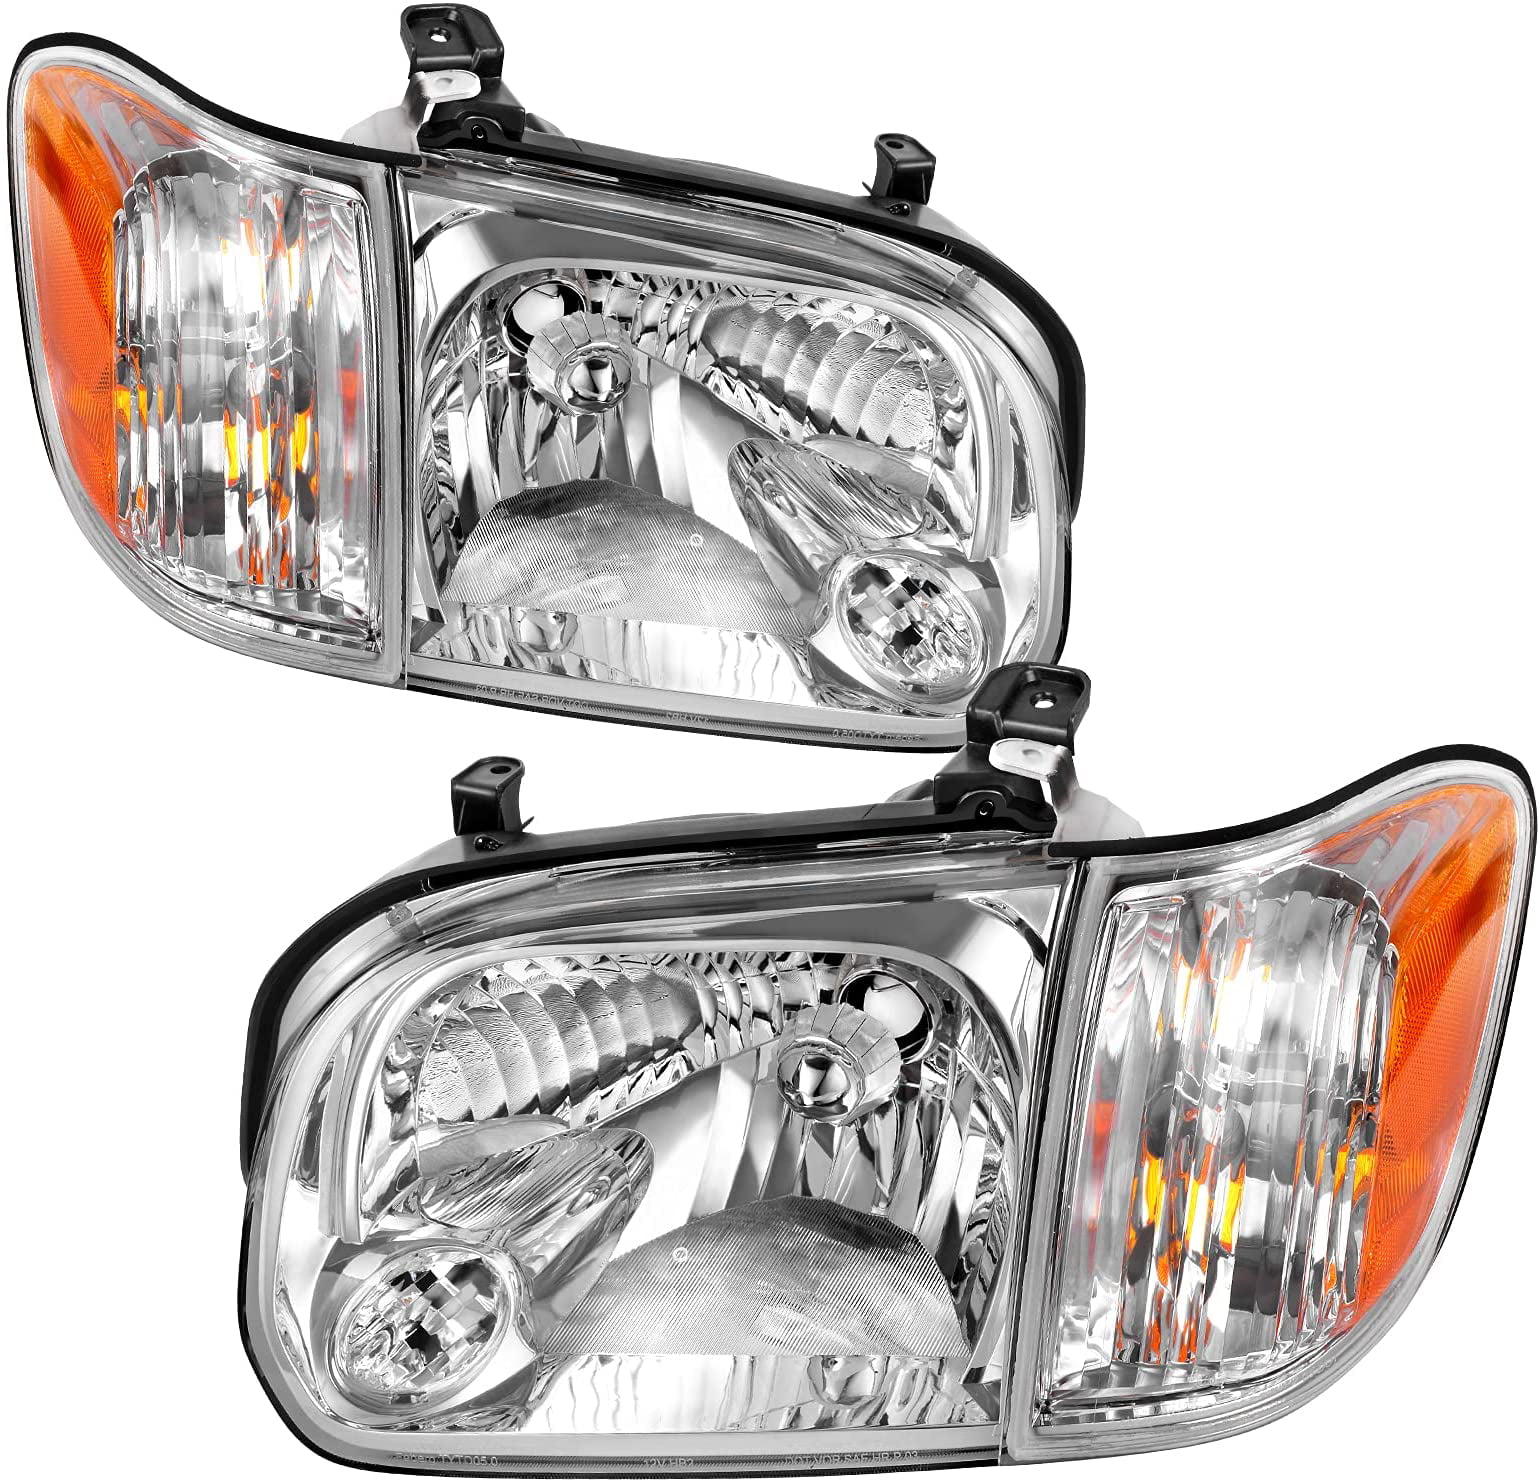 Set of 2 MOSTPLUS Headlight Assembly Compatible with 2005-2006 Toyota Tundra Double/Crew Cab 2005-2007 Sequoia-Chrome Housing with Amber Reflector Front Lamp